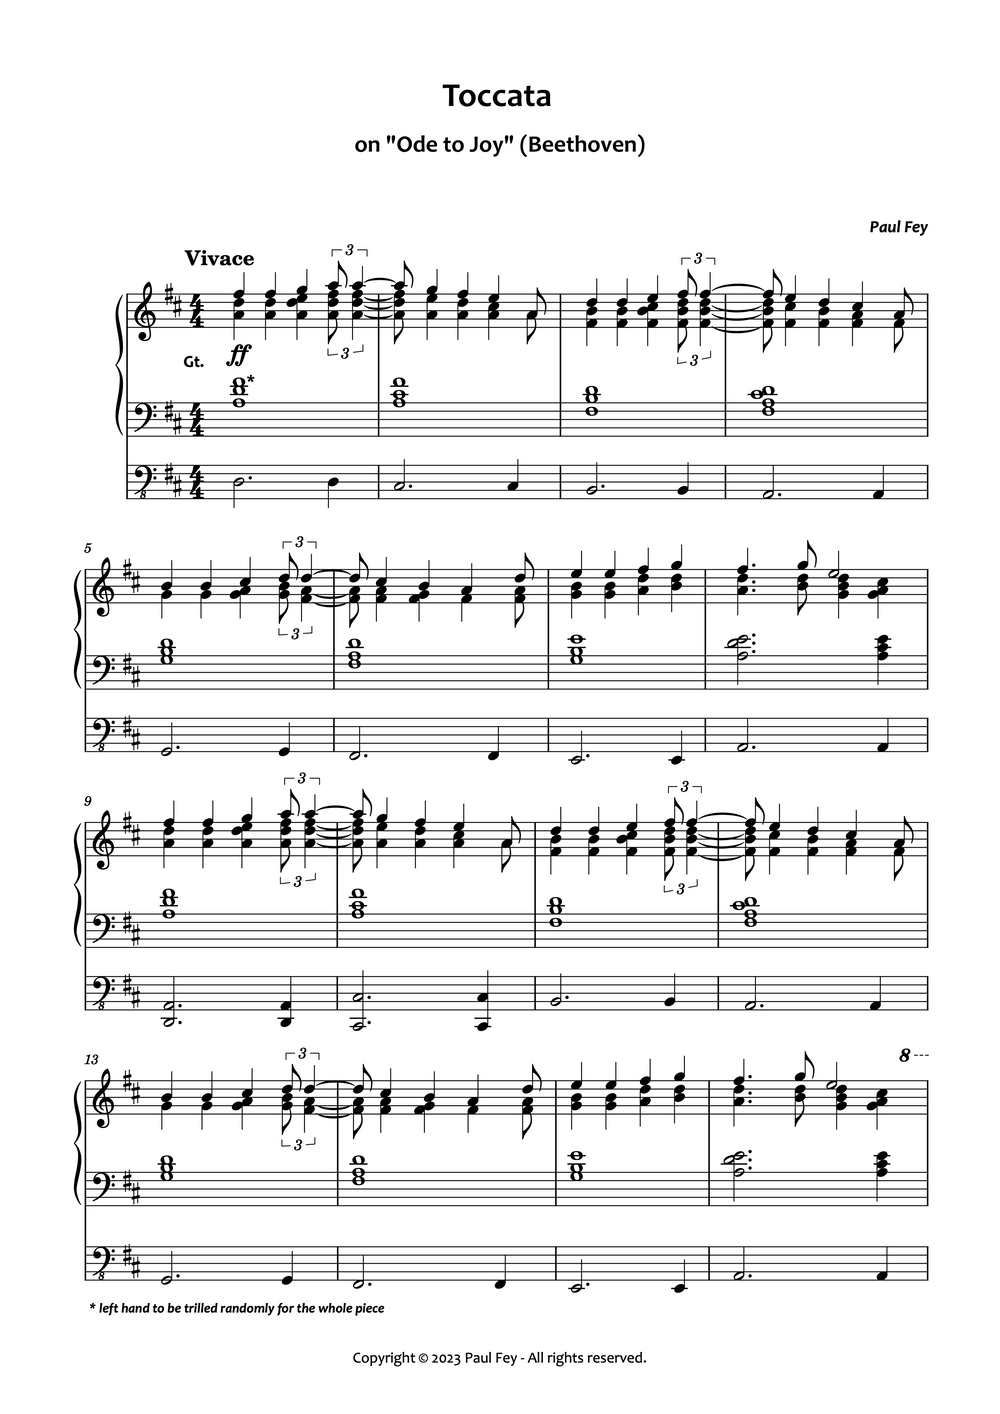 Toccata on "Ode to Joy" (Sheet Music) - Music for Organ by paul fey organist